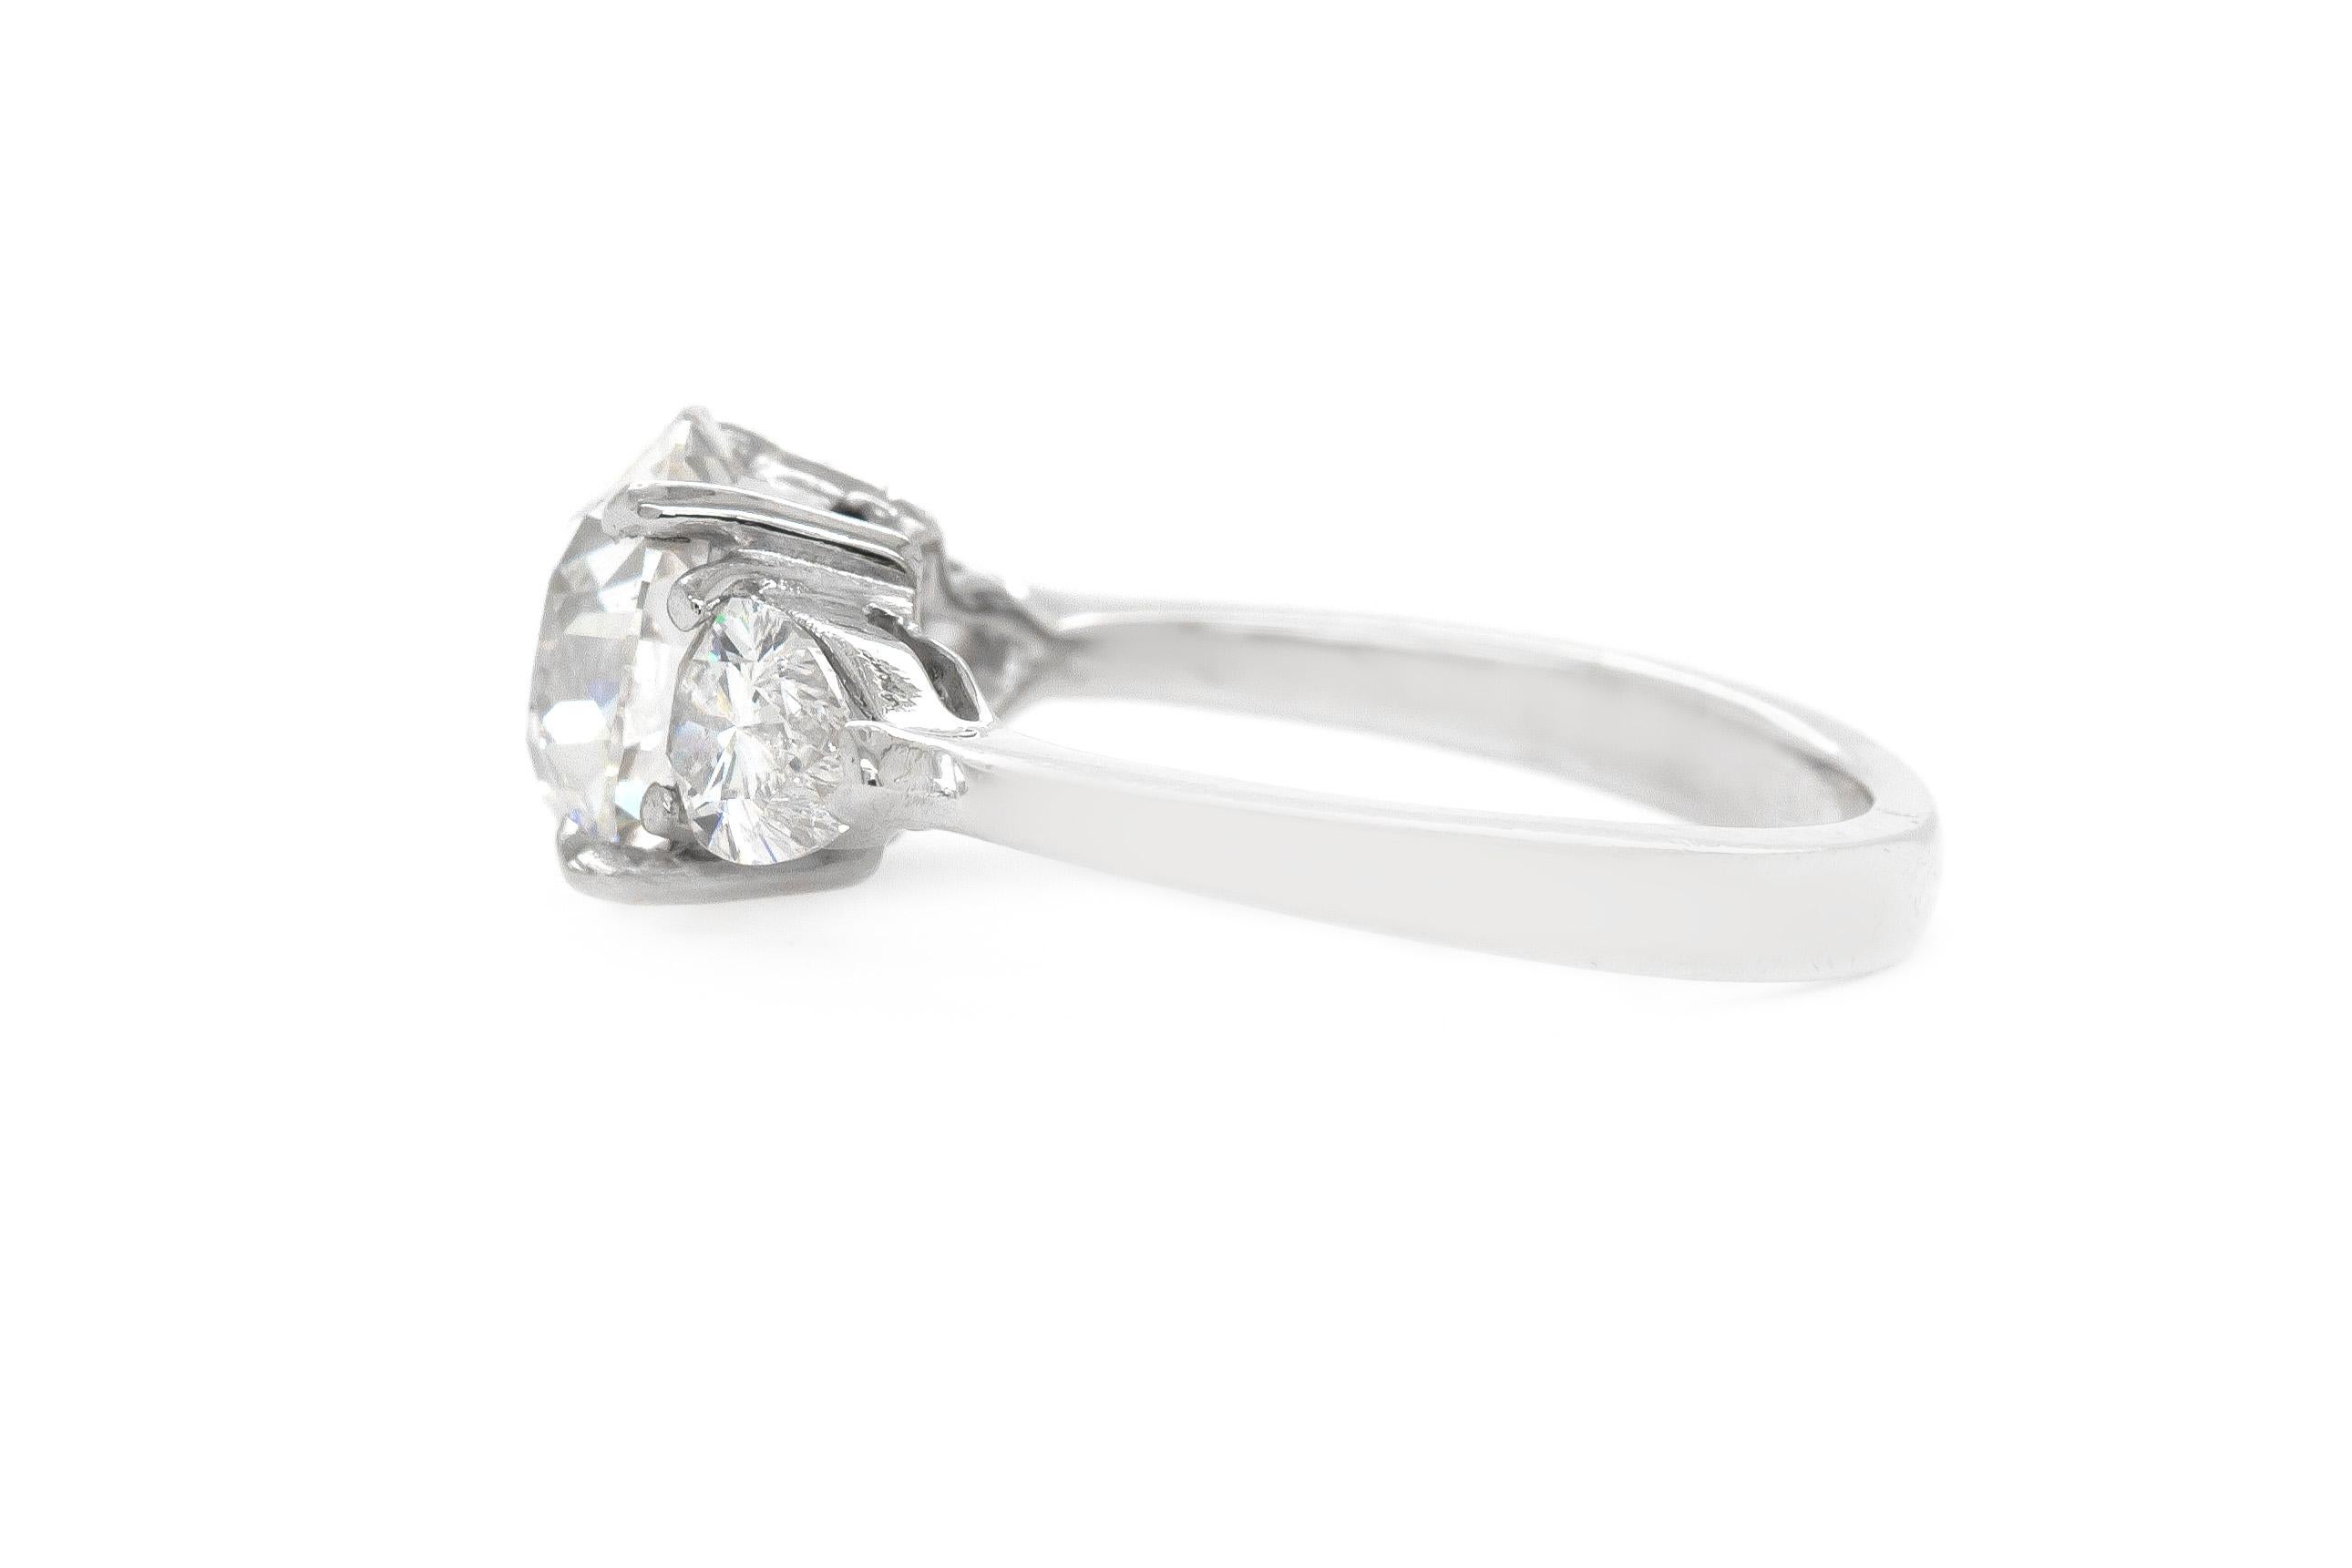 Finely crafted in platinum with a center Old European cut diamond weighing 1.64 carats. The ring features two pear cut side diamonds weighing approximately a total of 0.60 carats.
Color G Clarity SI2
GIA Certified